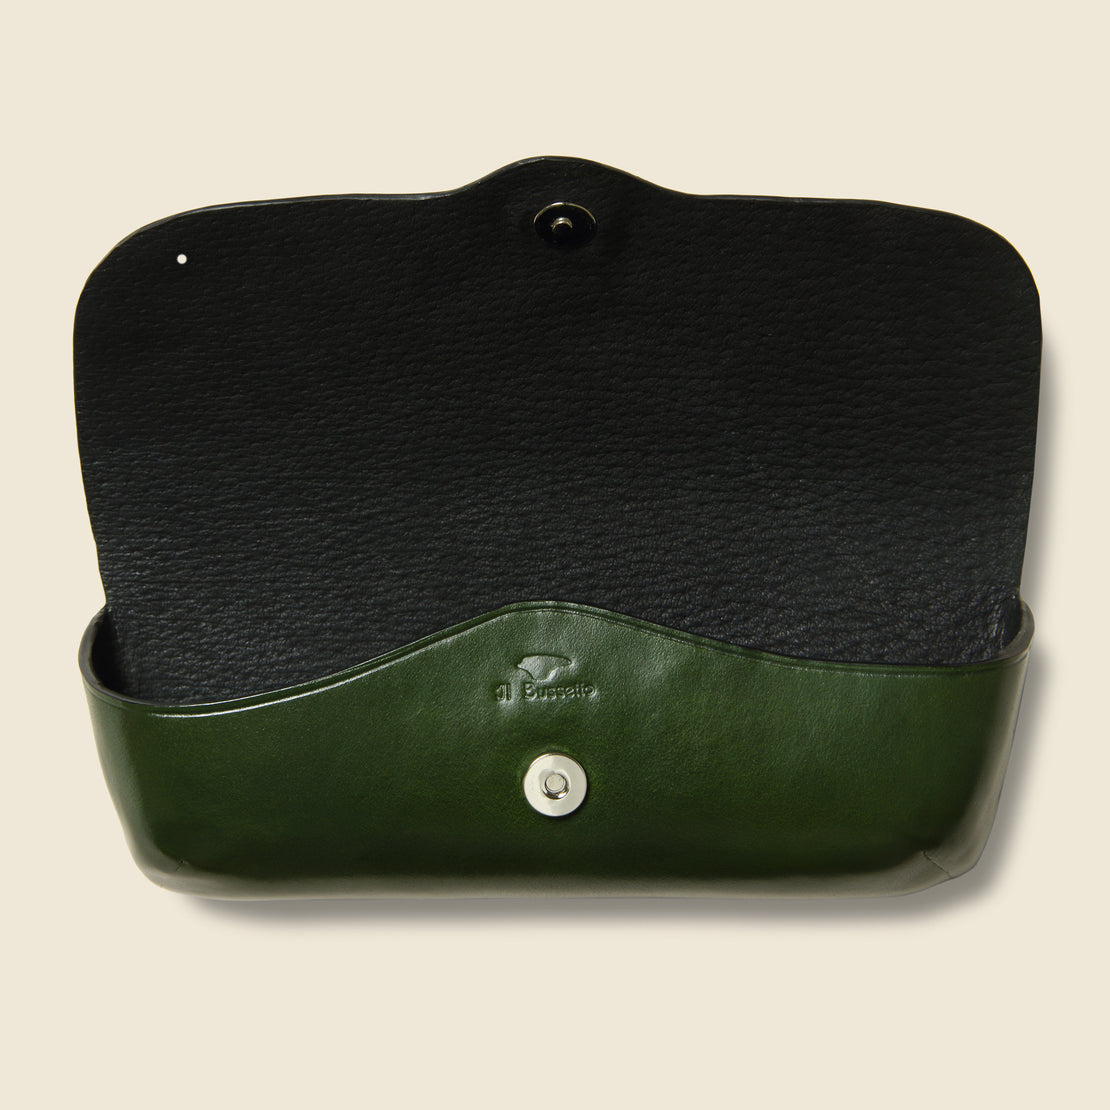 Eyeglass Case - Green - Il Bussetto - STAG Provisions - Accessories - Eyewear